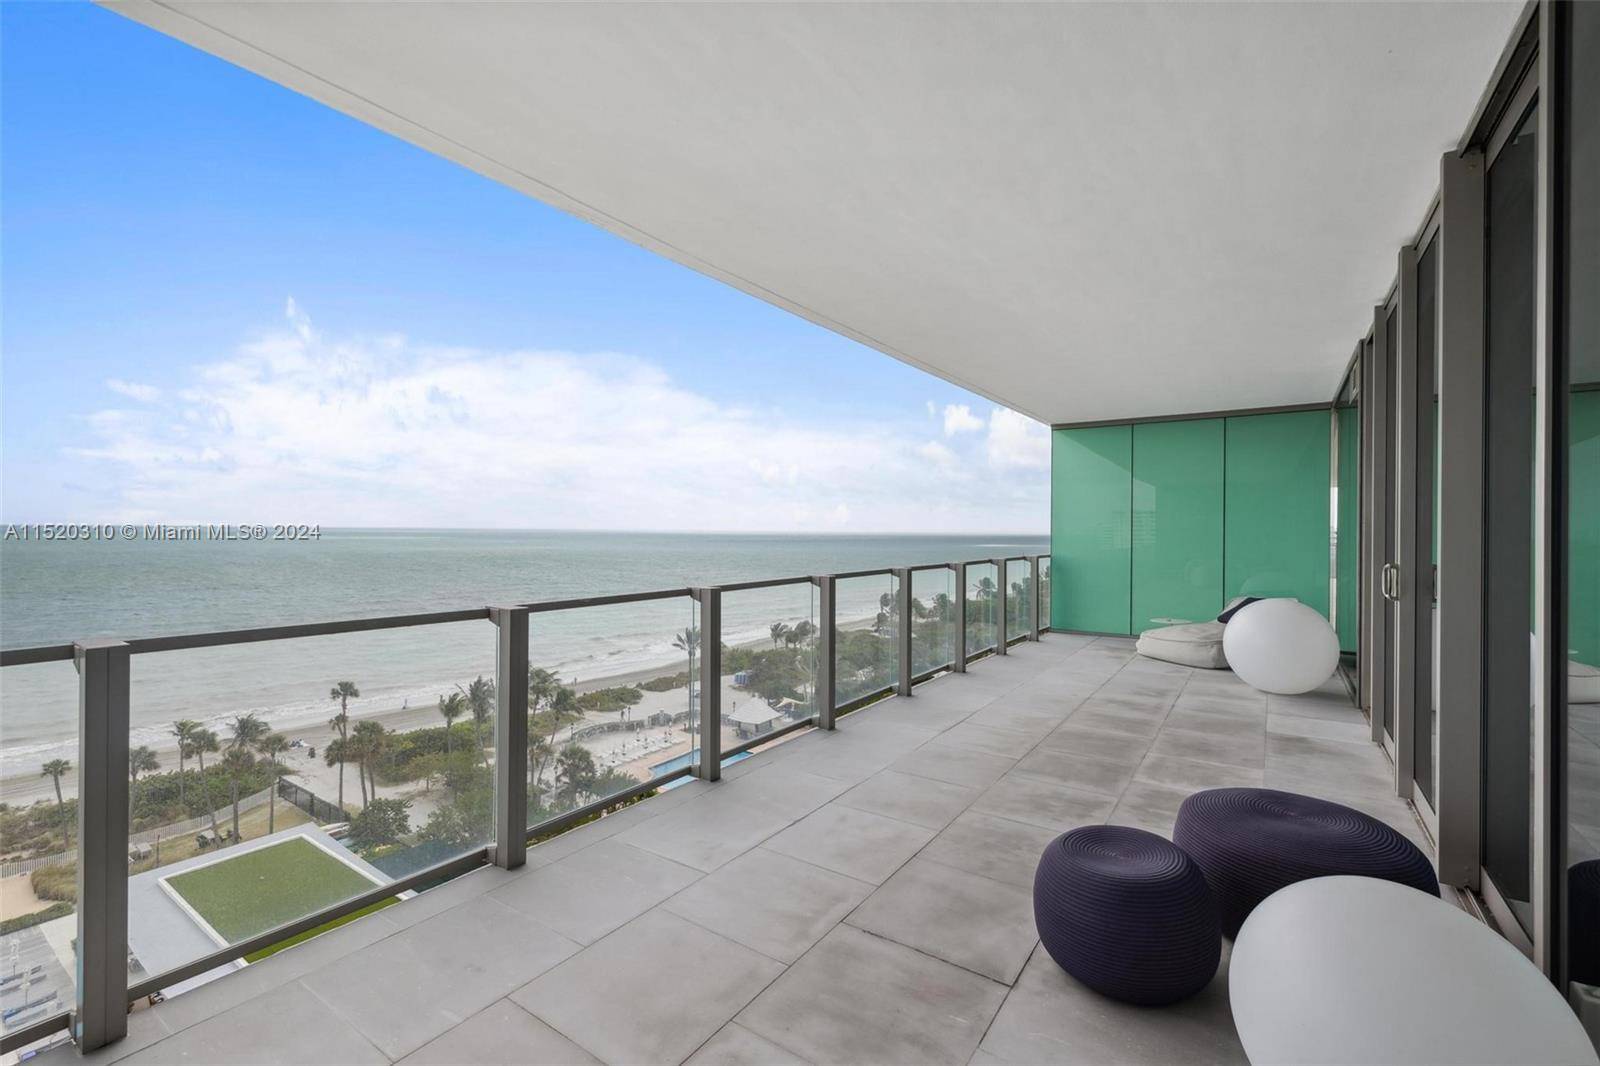 Welcome to this outstanding waterfront design by renowned architect Ramon Alonso at Oceana the most exclusive building in Key Biscayne.